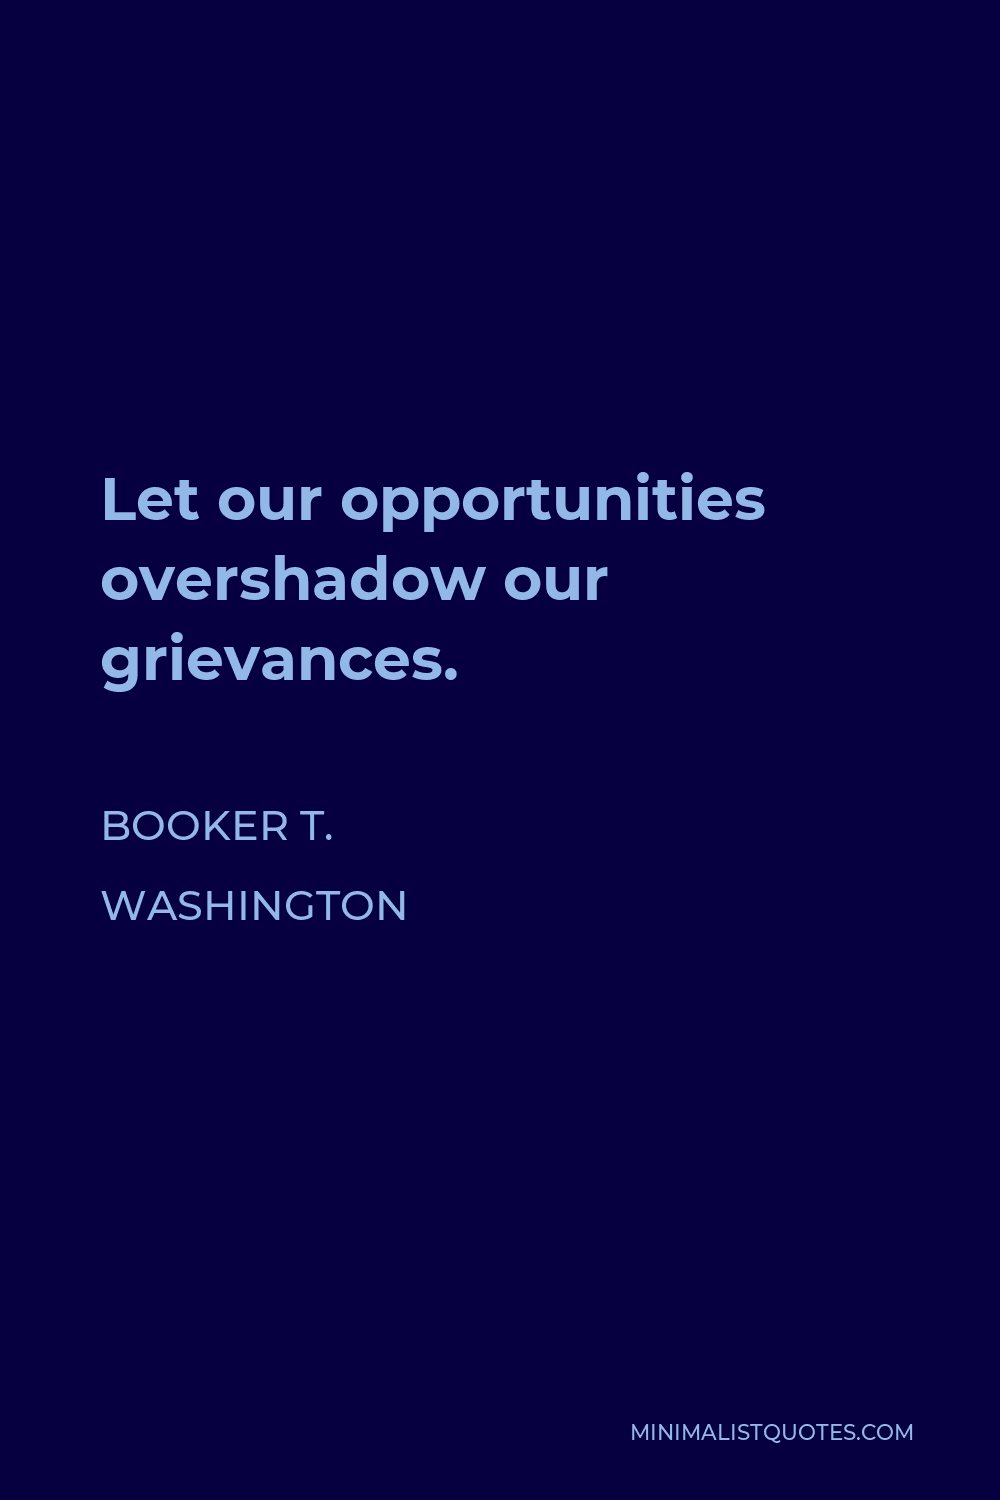 Booker T. Washington Quote - Let our opportunities overshadow our grievances.